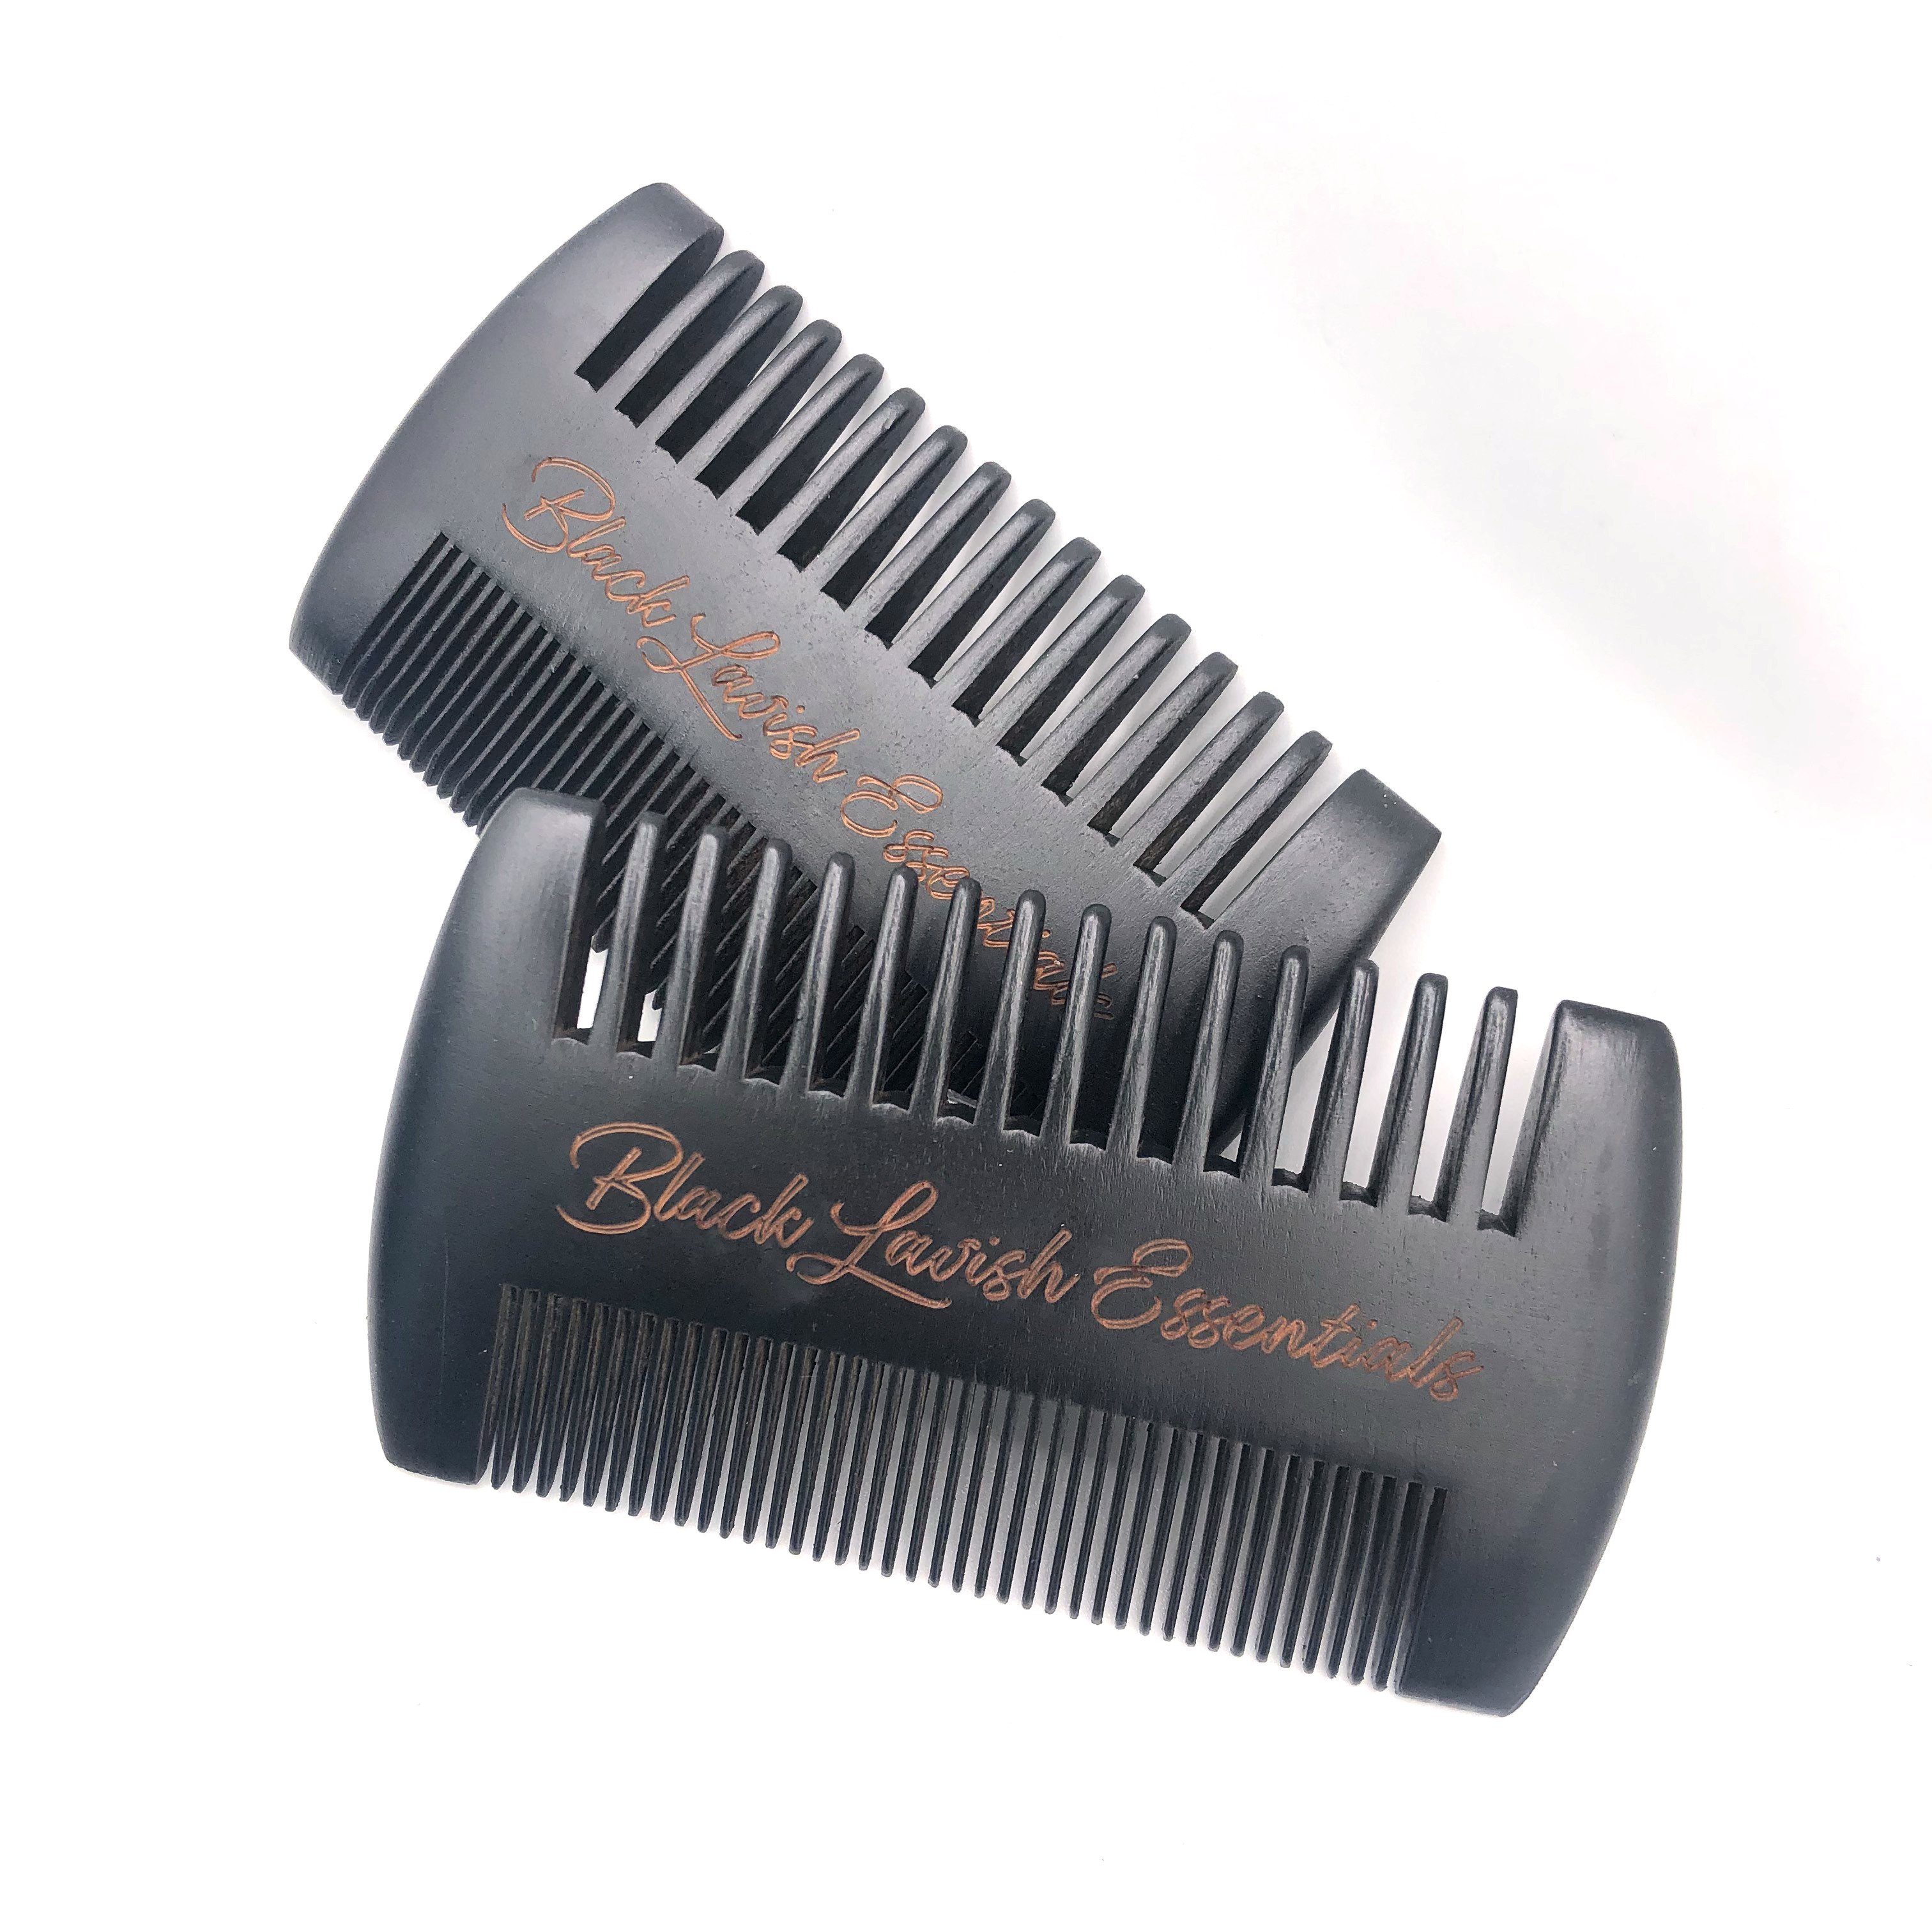 Our BLE finished peach wood comb is a must have for men who want to maintain a healthy beard with minimal to no breakage.   There are two sides to use depending on your beards style and strength. The thin tooth comb can be used for fine smaller beards and the wide tooth comb is recommended for more refined, thicker, and fuller beards.